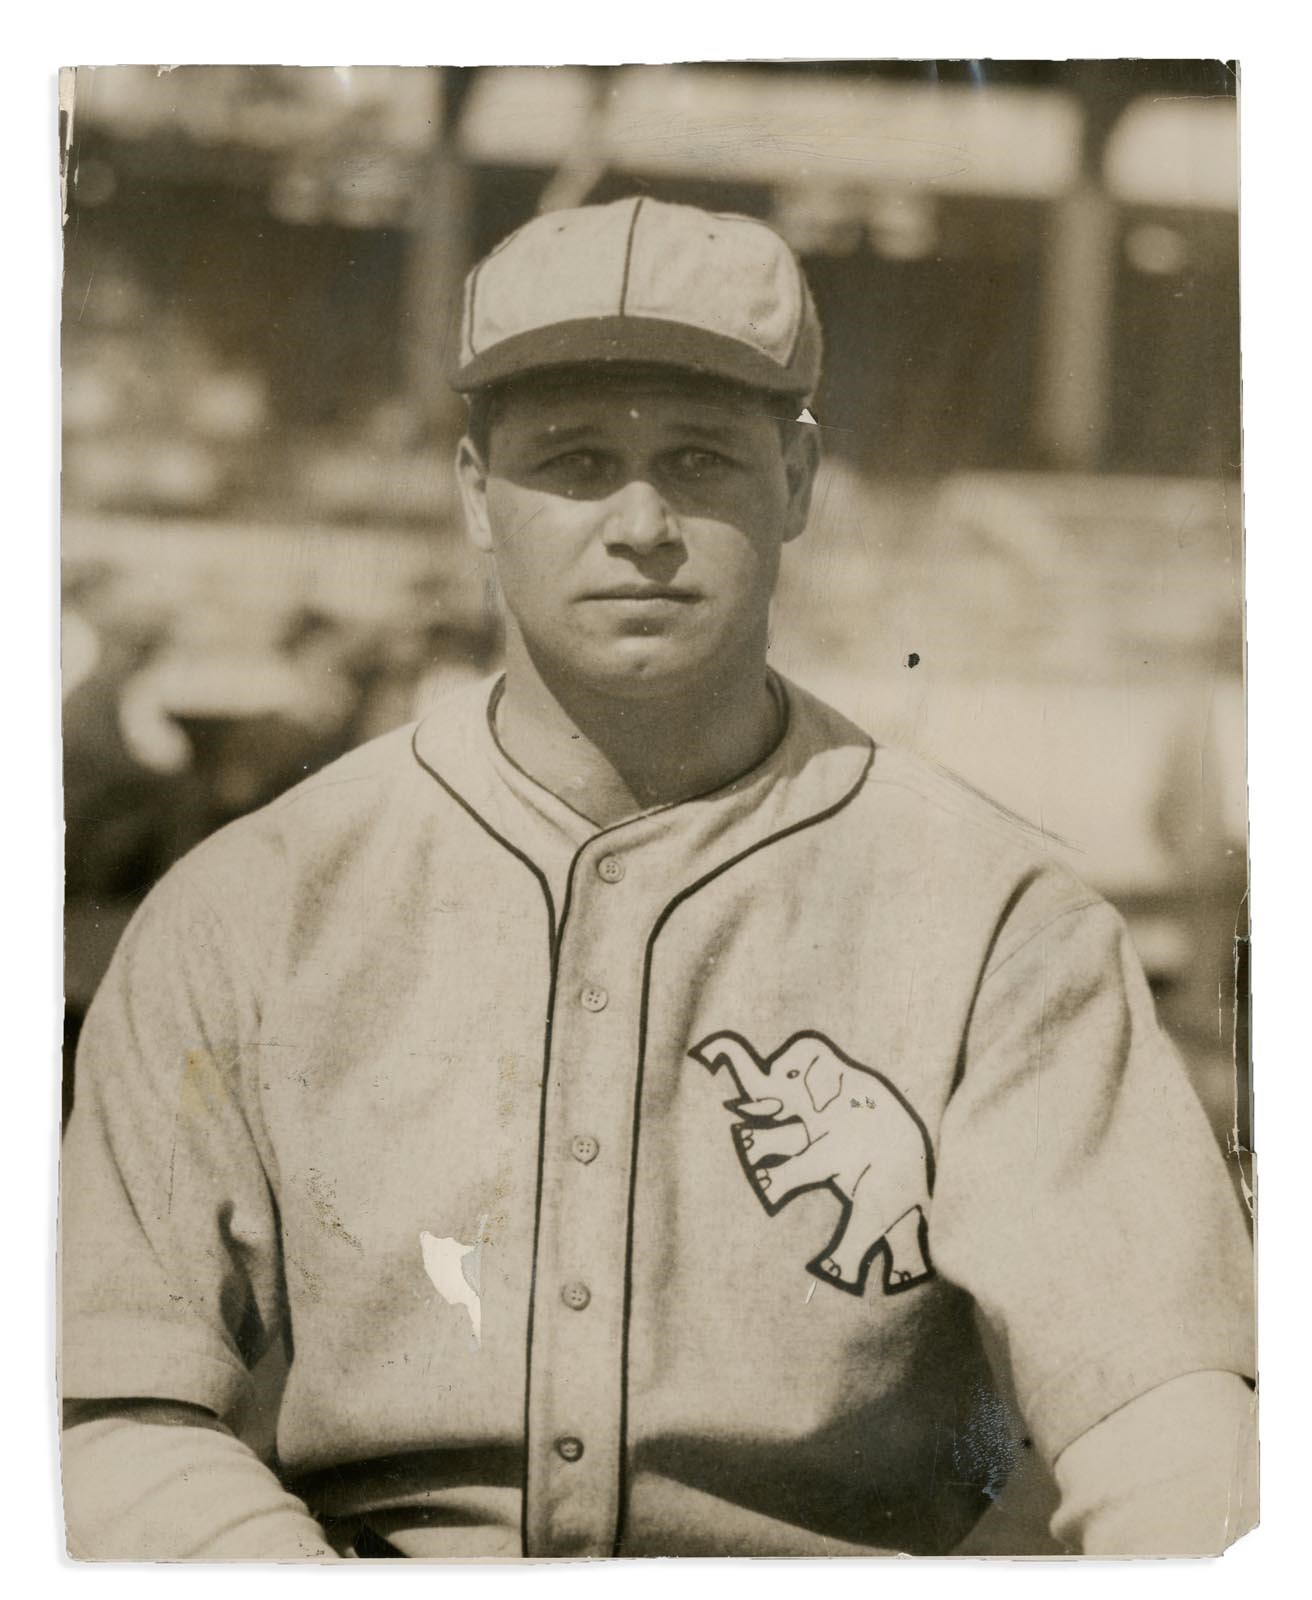 Vintage Sports Photographs - 1926 "Up and Coming" Jimmie Foxx (Rookie Season) By Charles Conlon